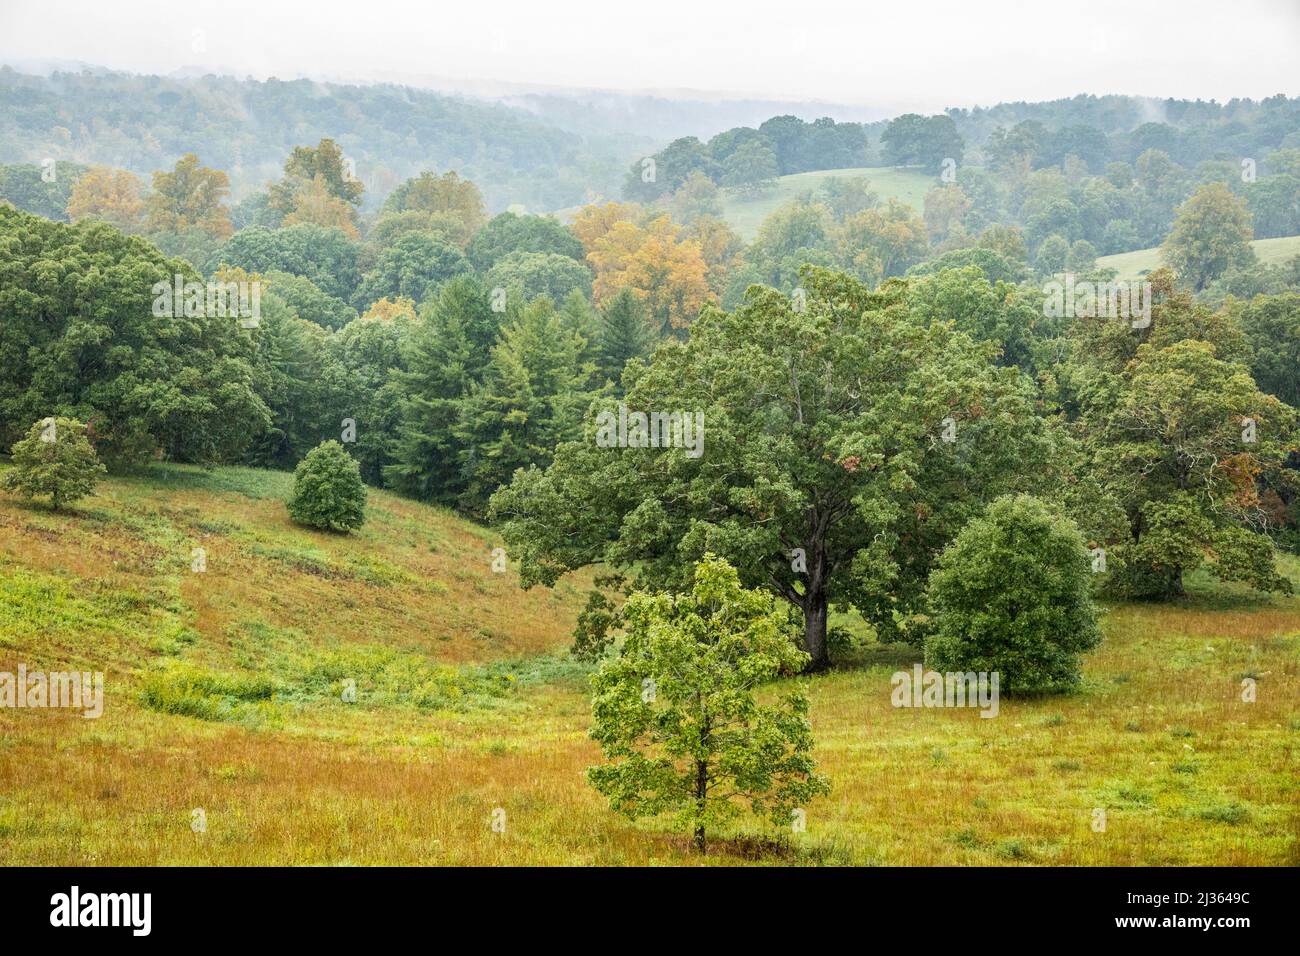 Looking out over the wooded rolling hills of the Biltmore Estate near Asheville, North Carolina, USA. Stock Photo